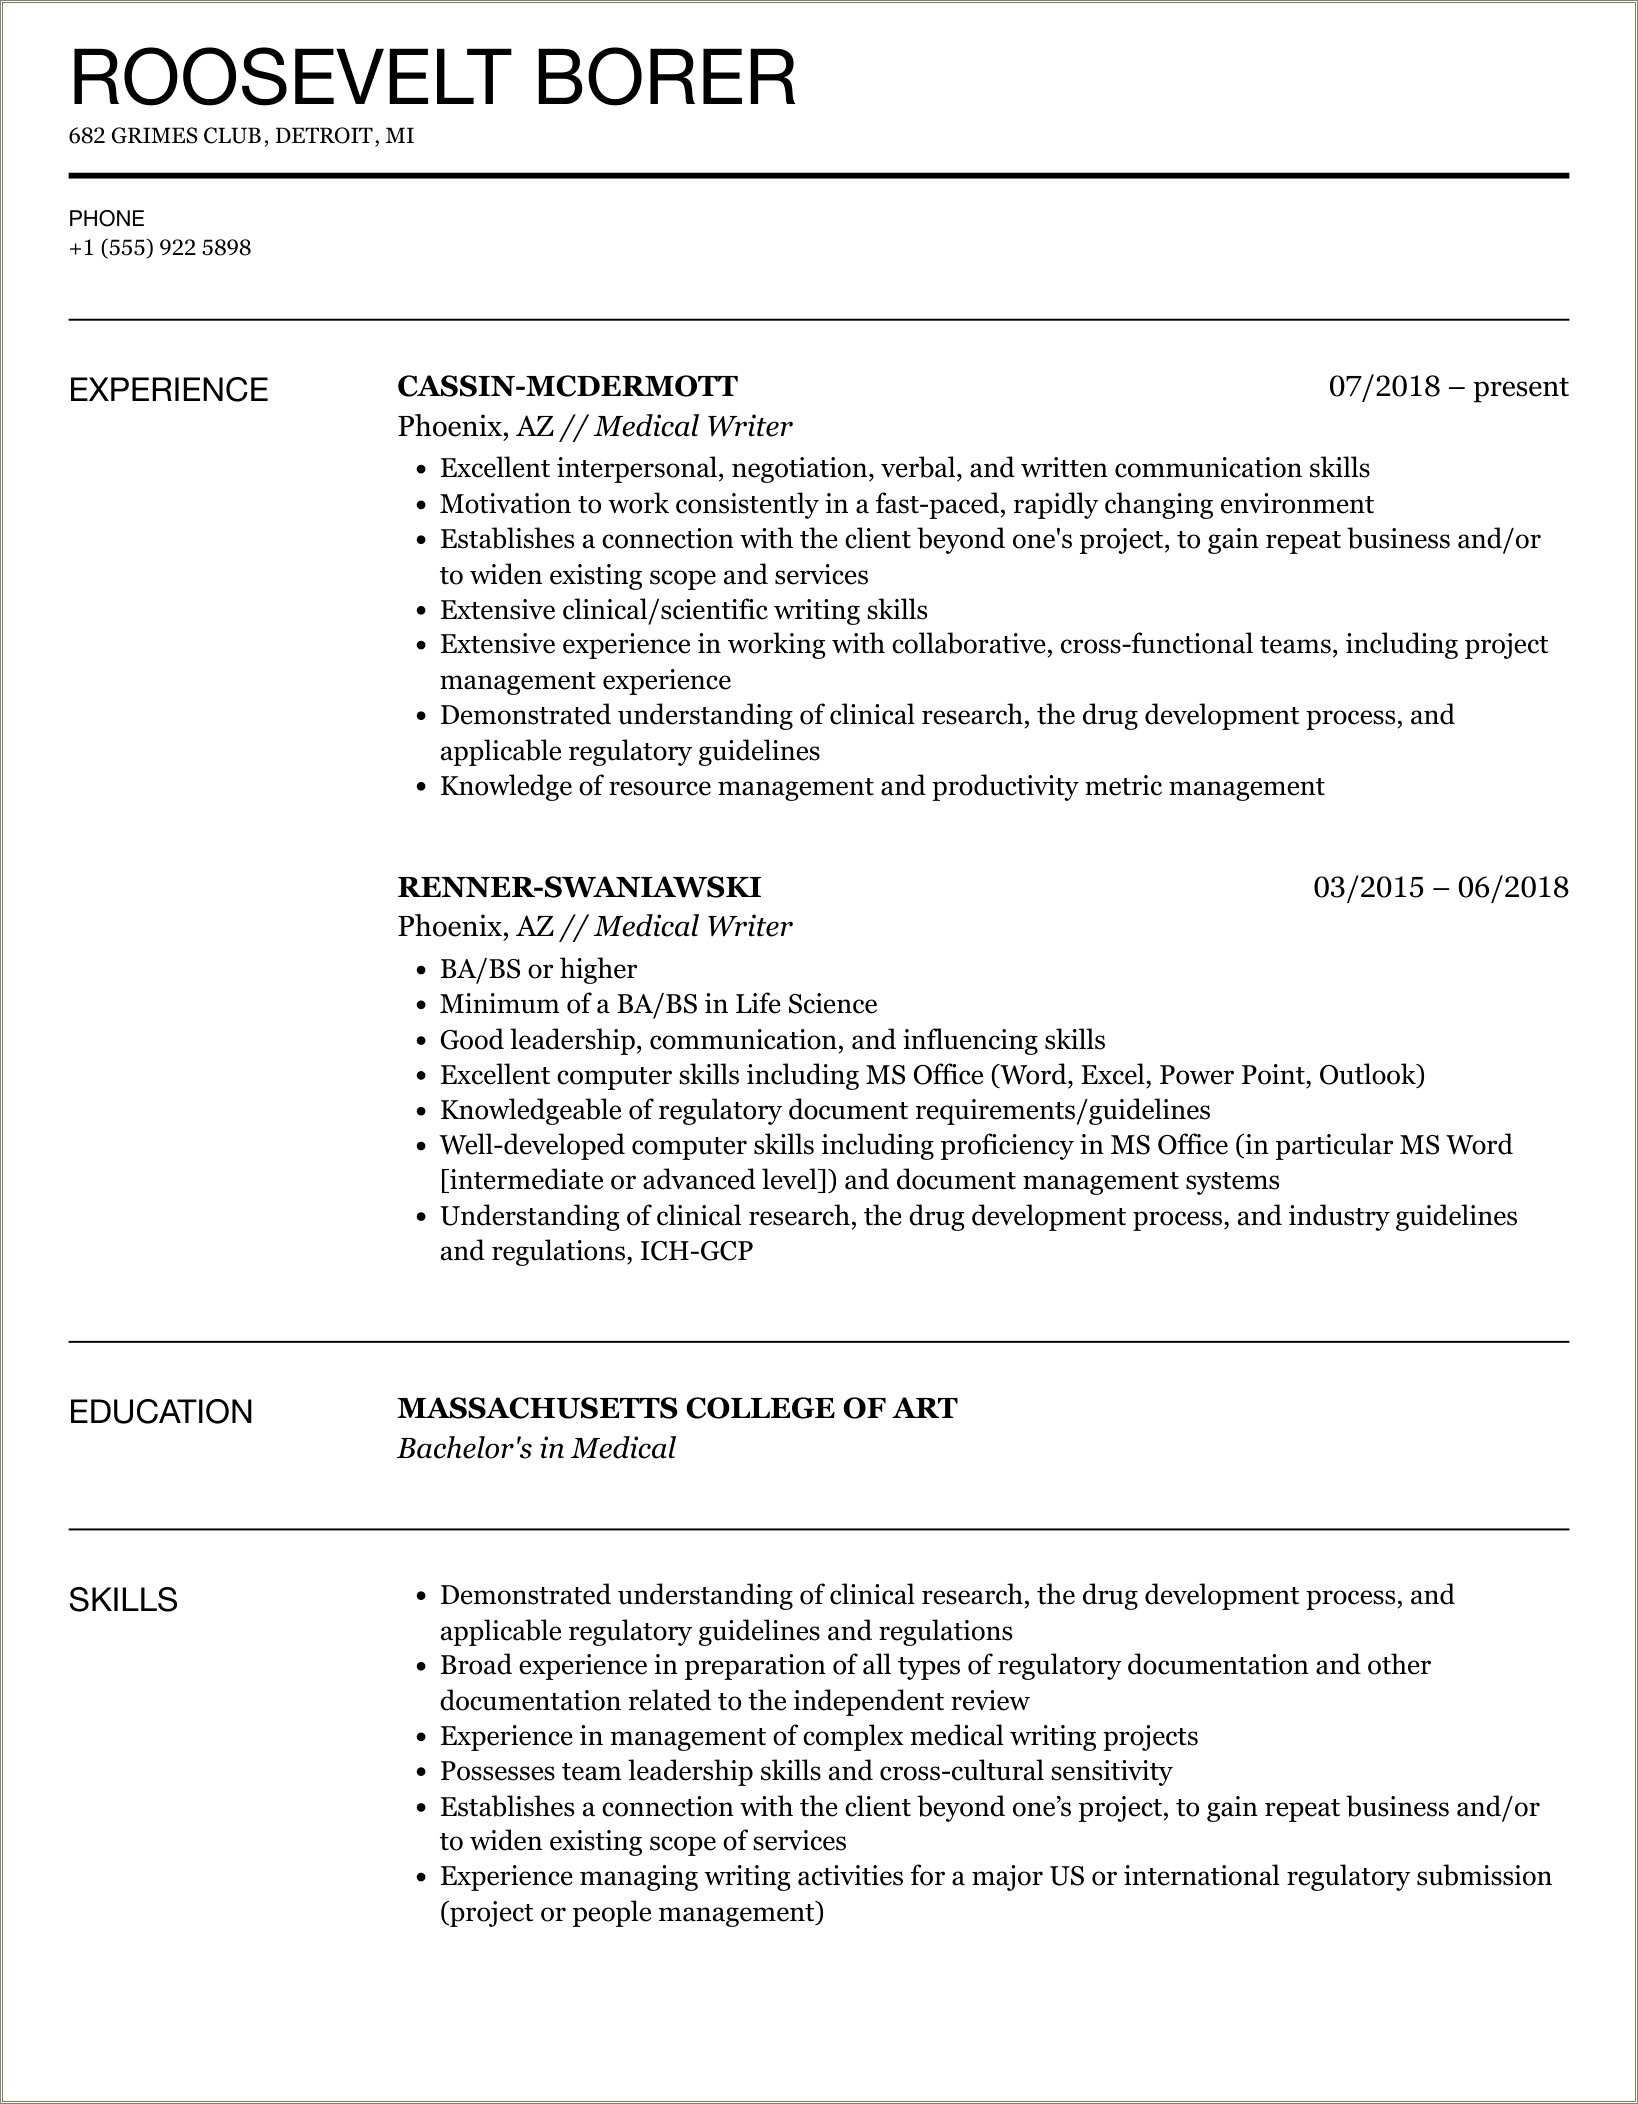 Sample Resume With Writing Sample Included